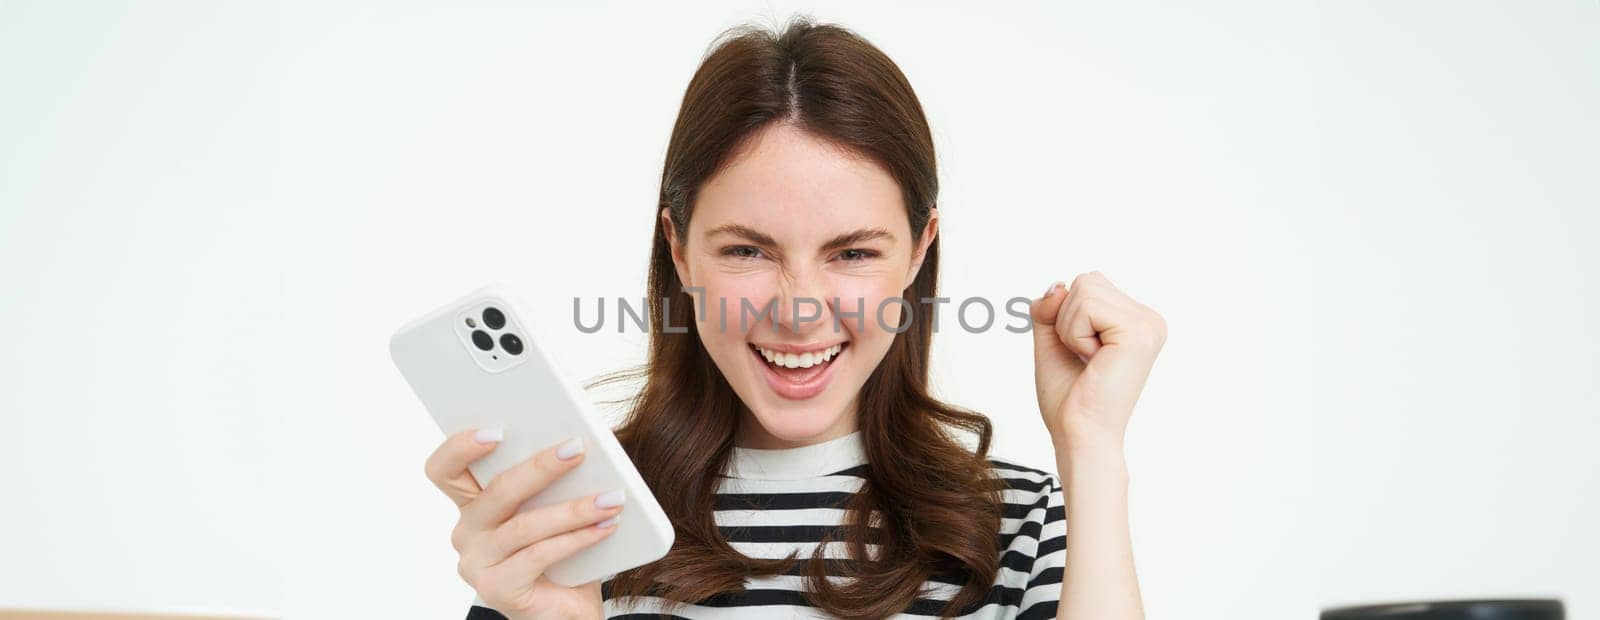 Girl is a champion, Young happy woman laughing and smiling, celebrating victory, winning, holding smartphone and triumphing.